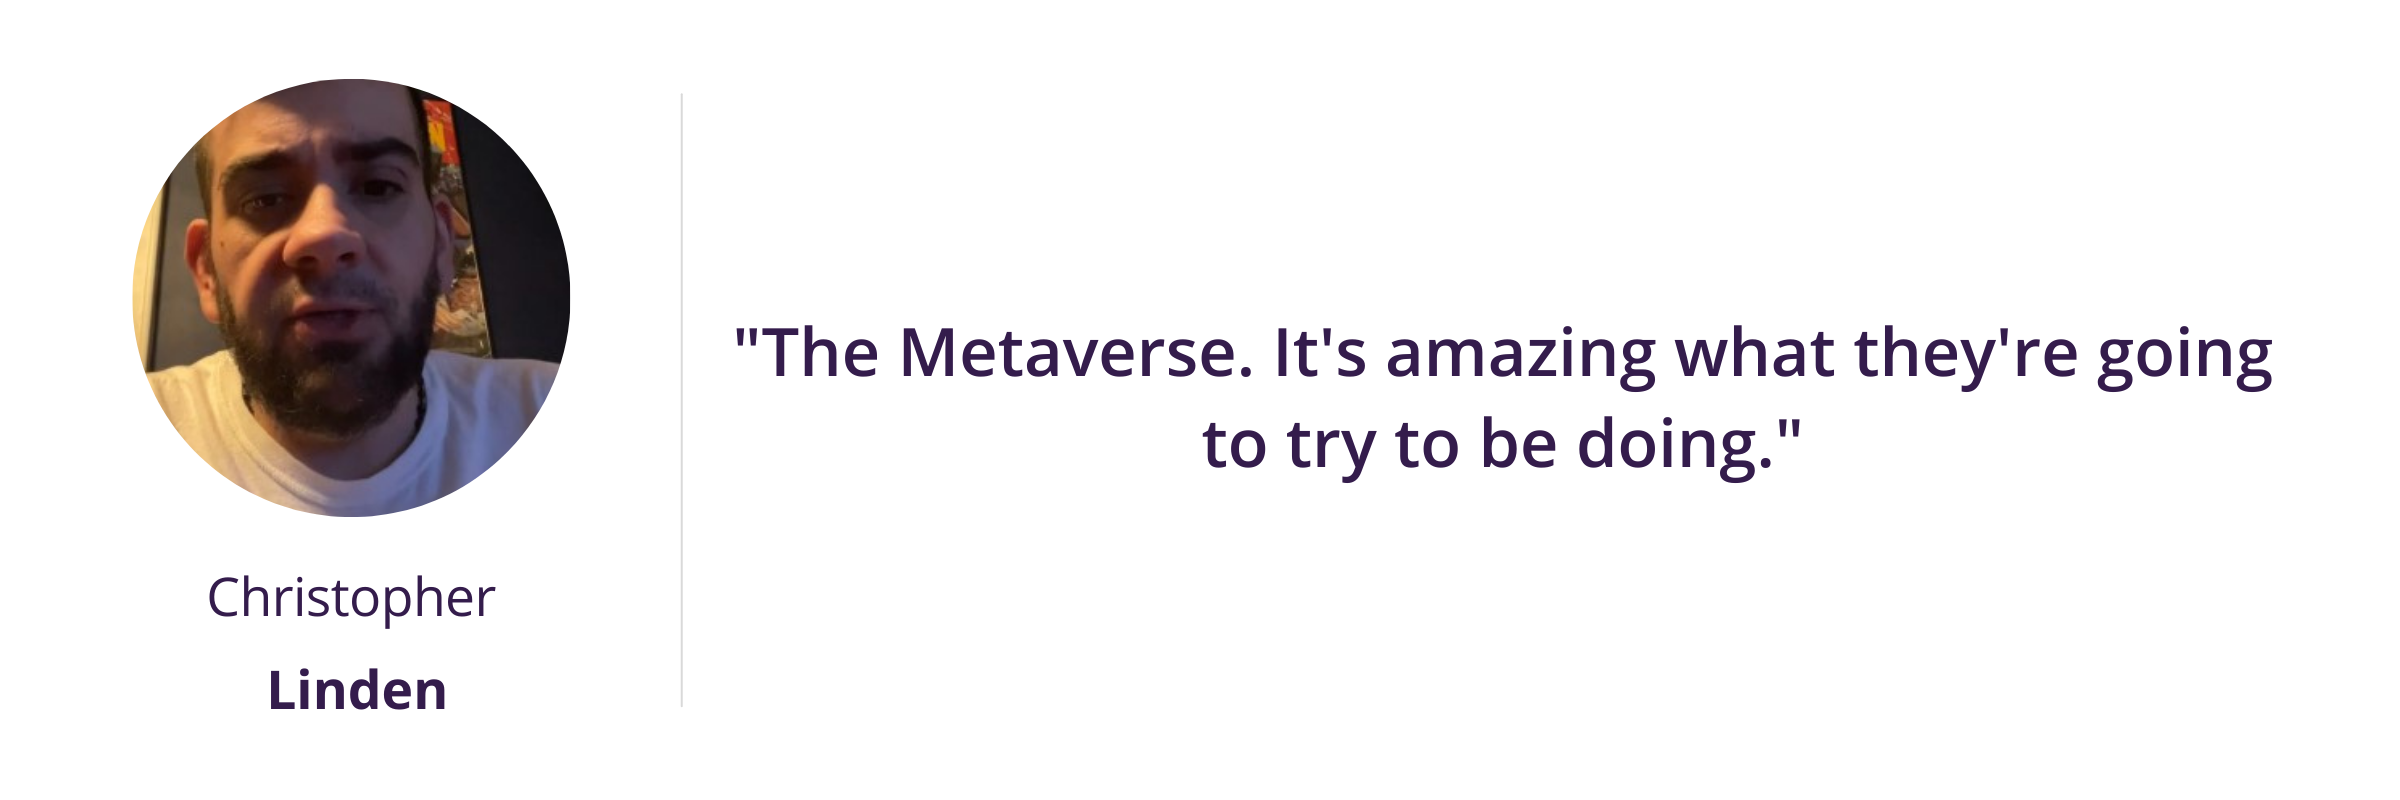 "The Metaverse. It's amazing what they're going to try to be doing."